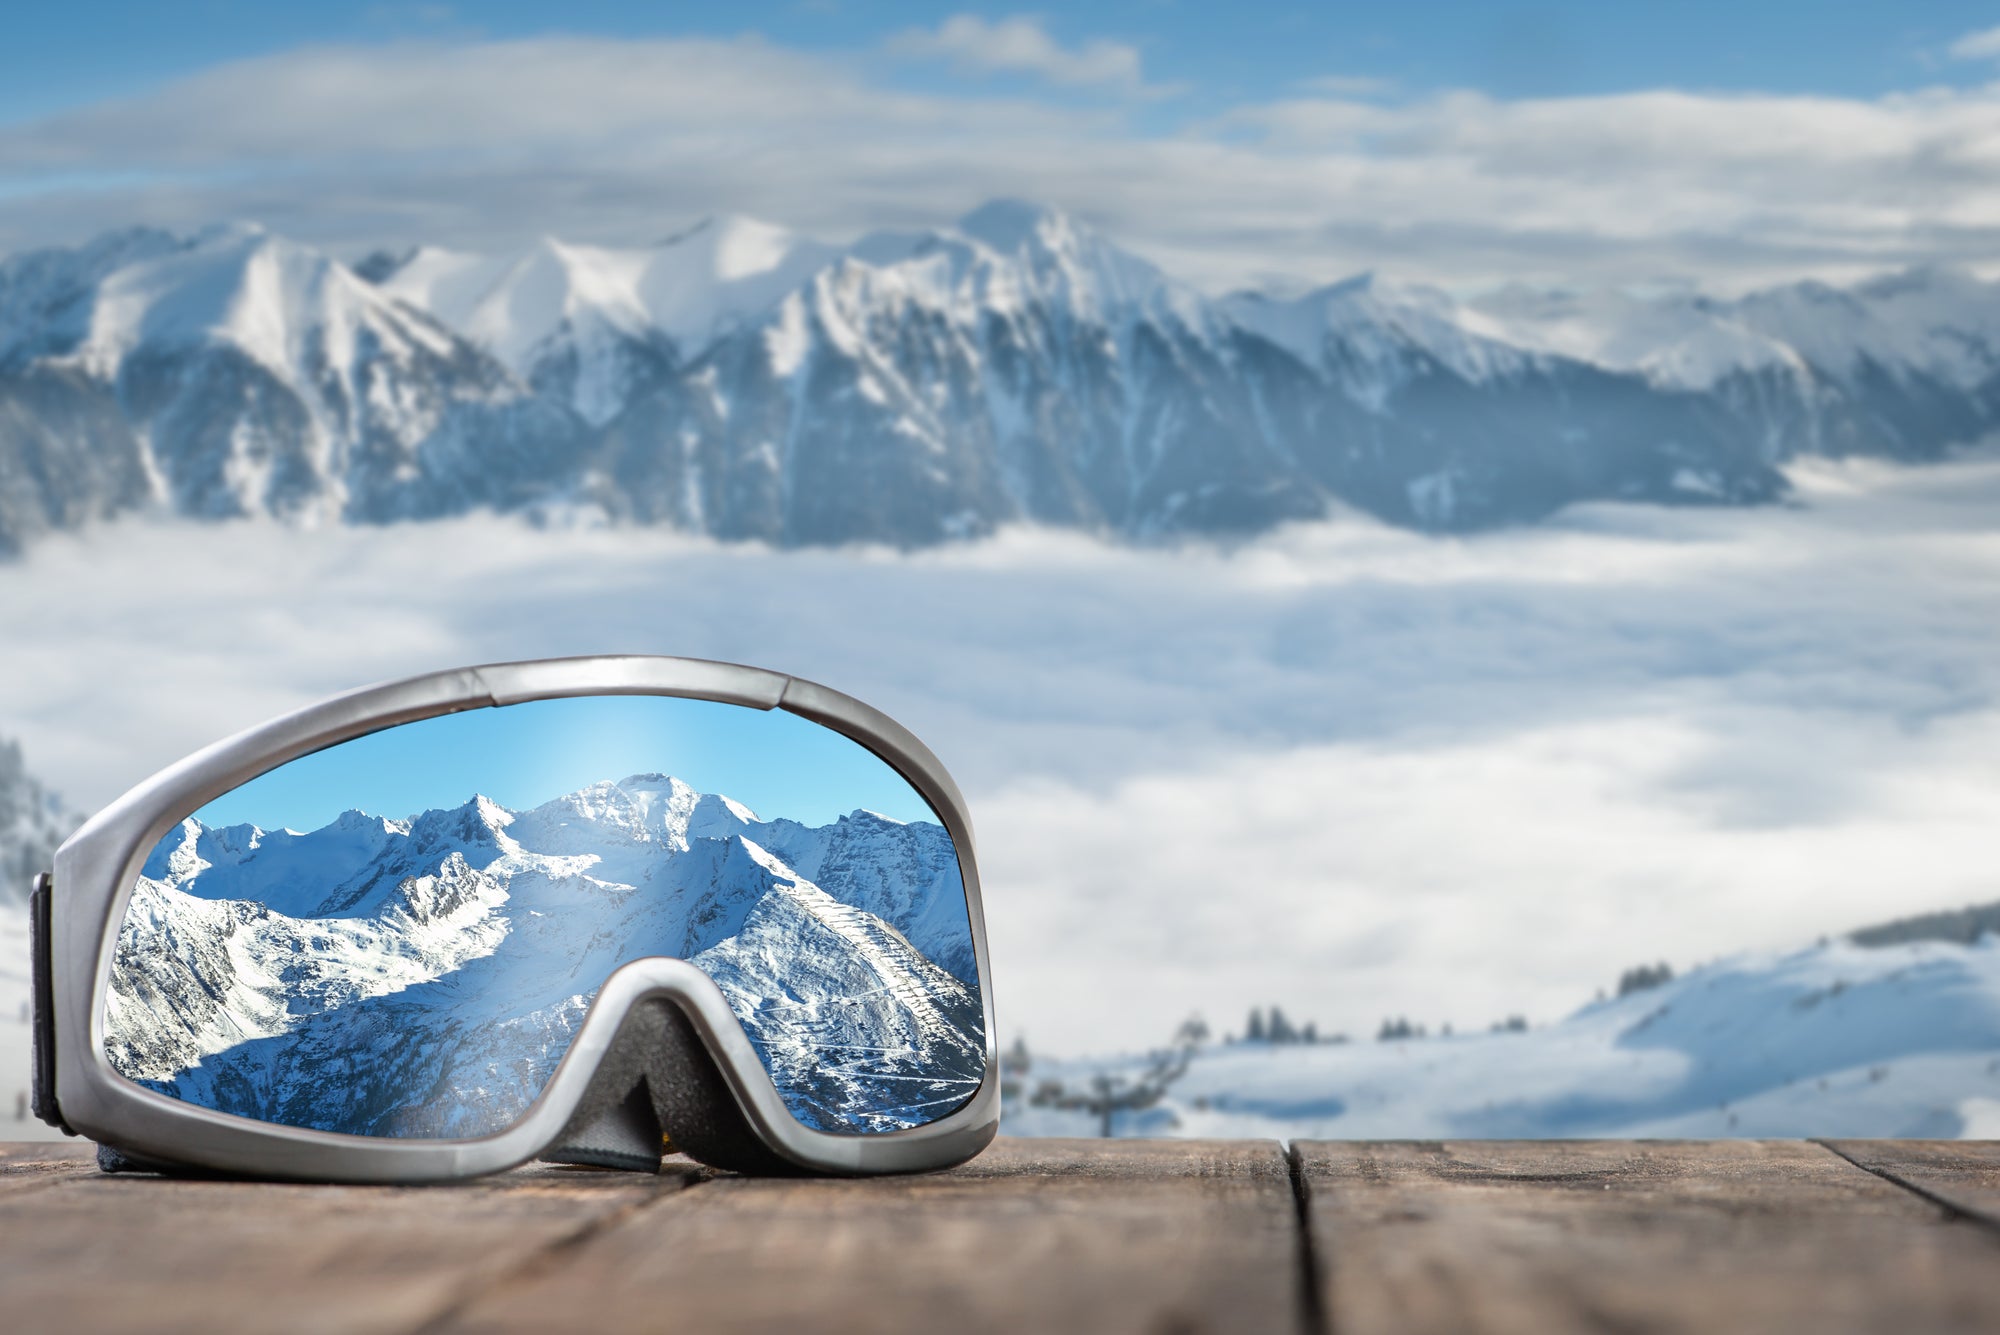 How Often Should You Clean Your Ski Goggles?